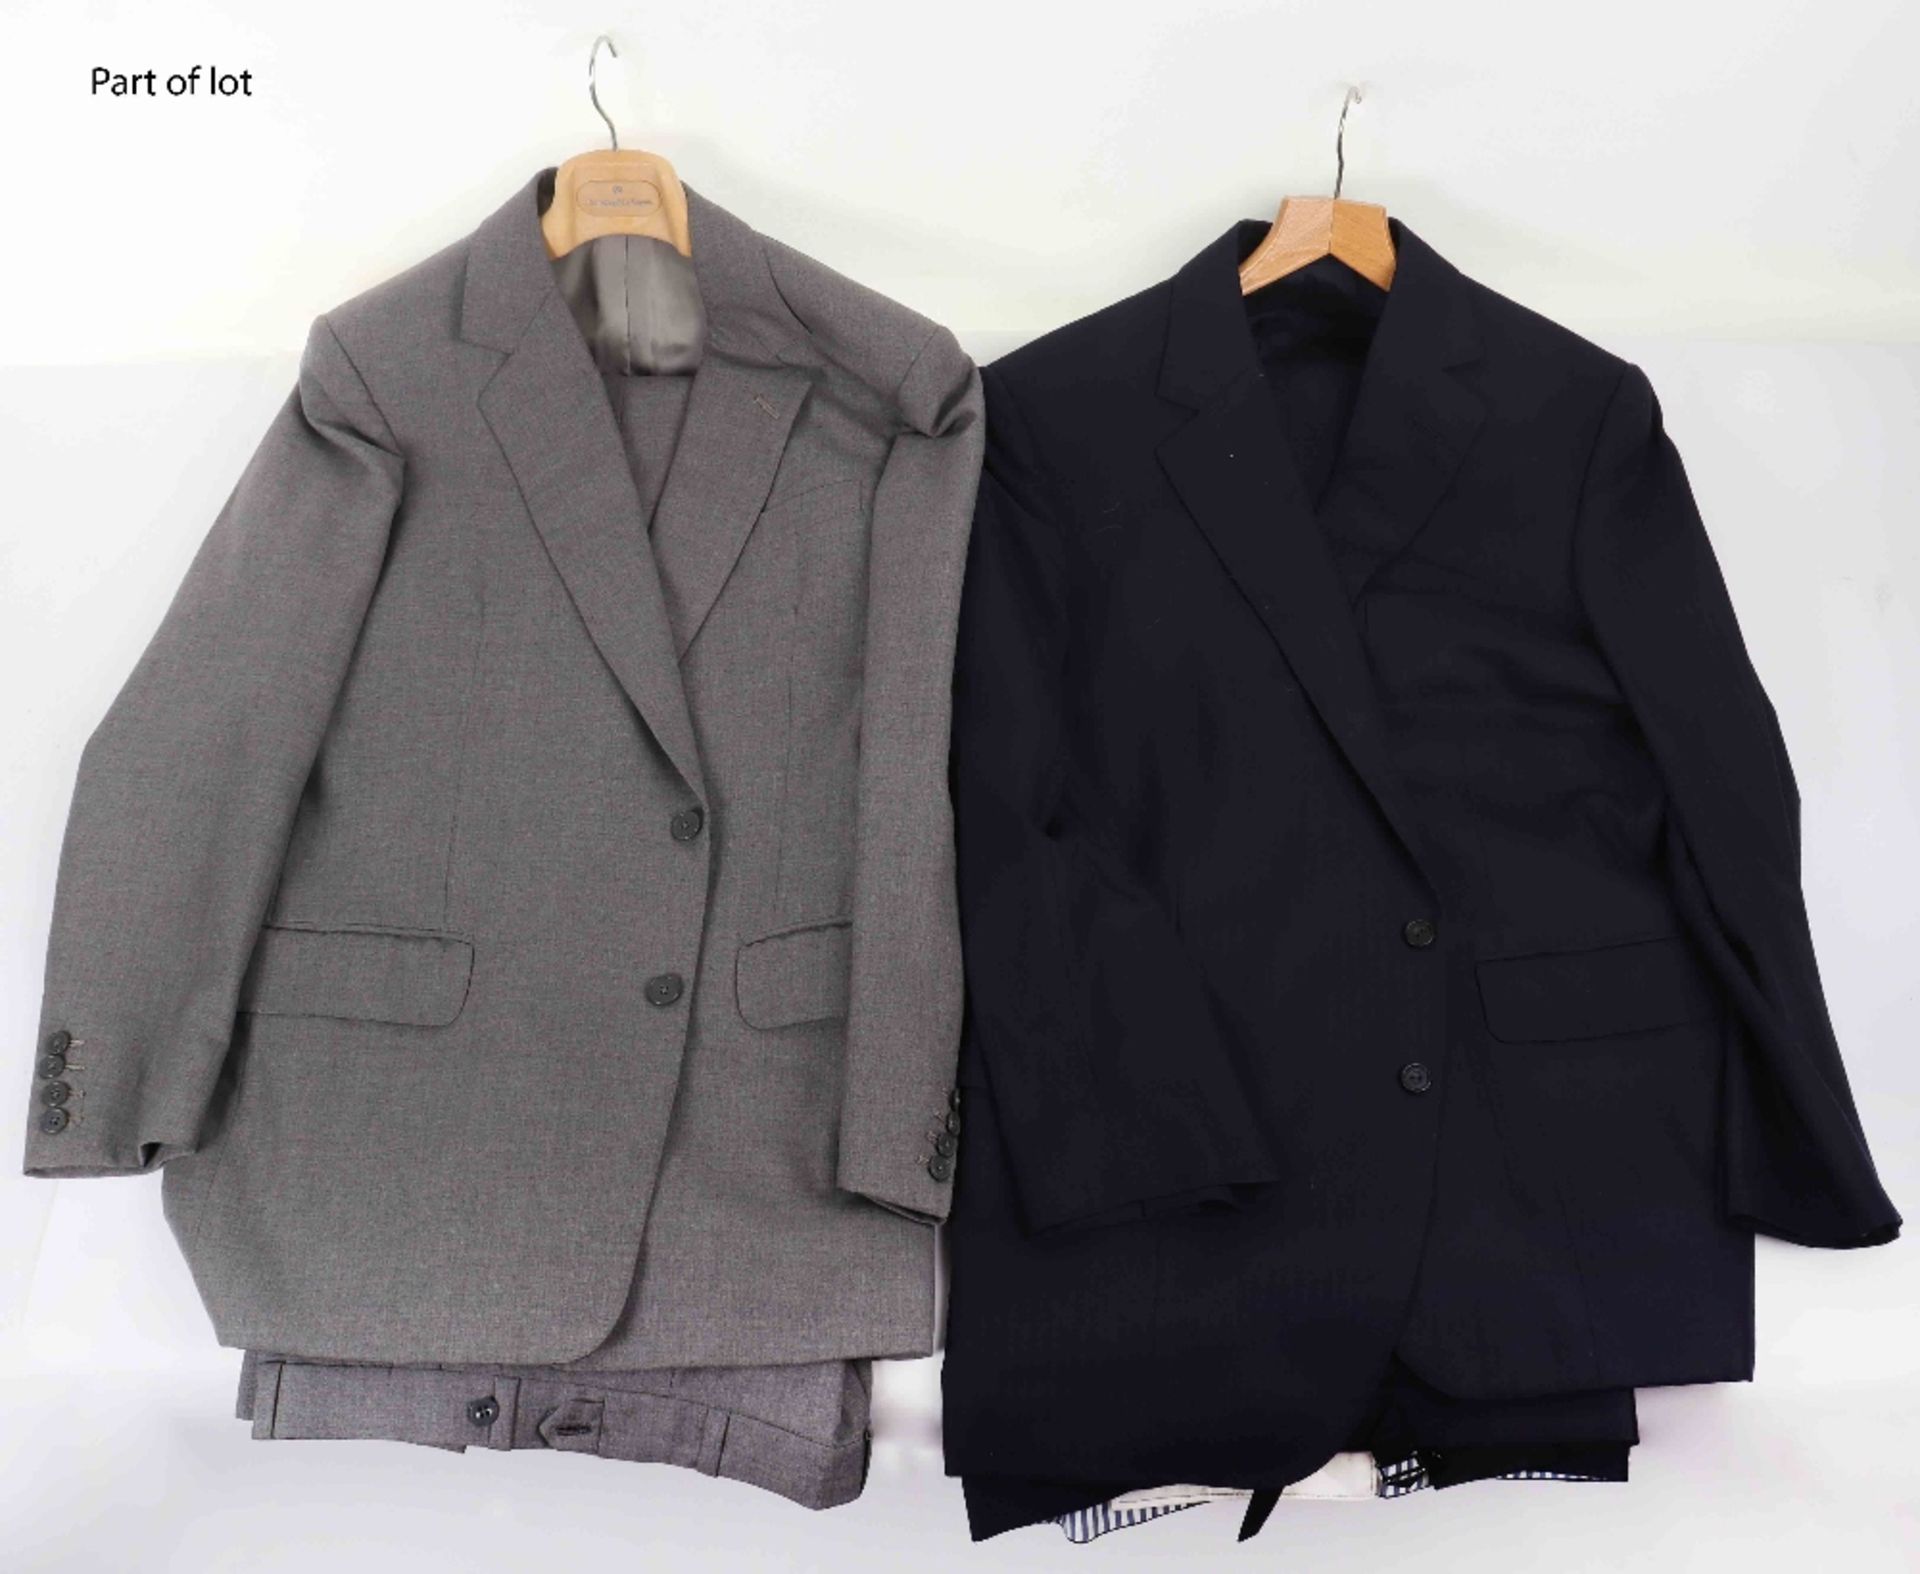 A selection of fine men’s suits and jackets, including Harris Tweed, three unbranded but high qualit - Image 3 of 3